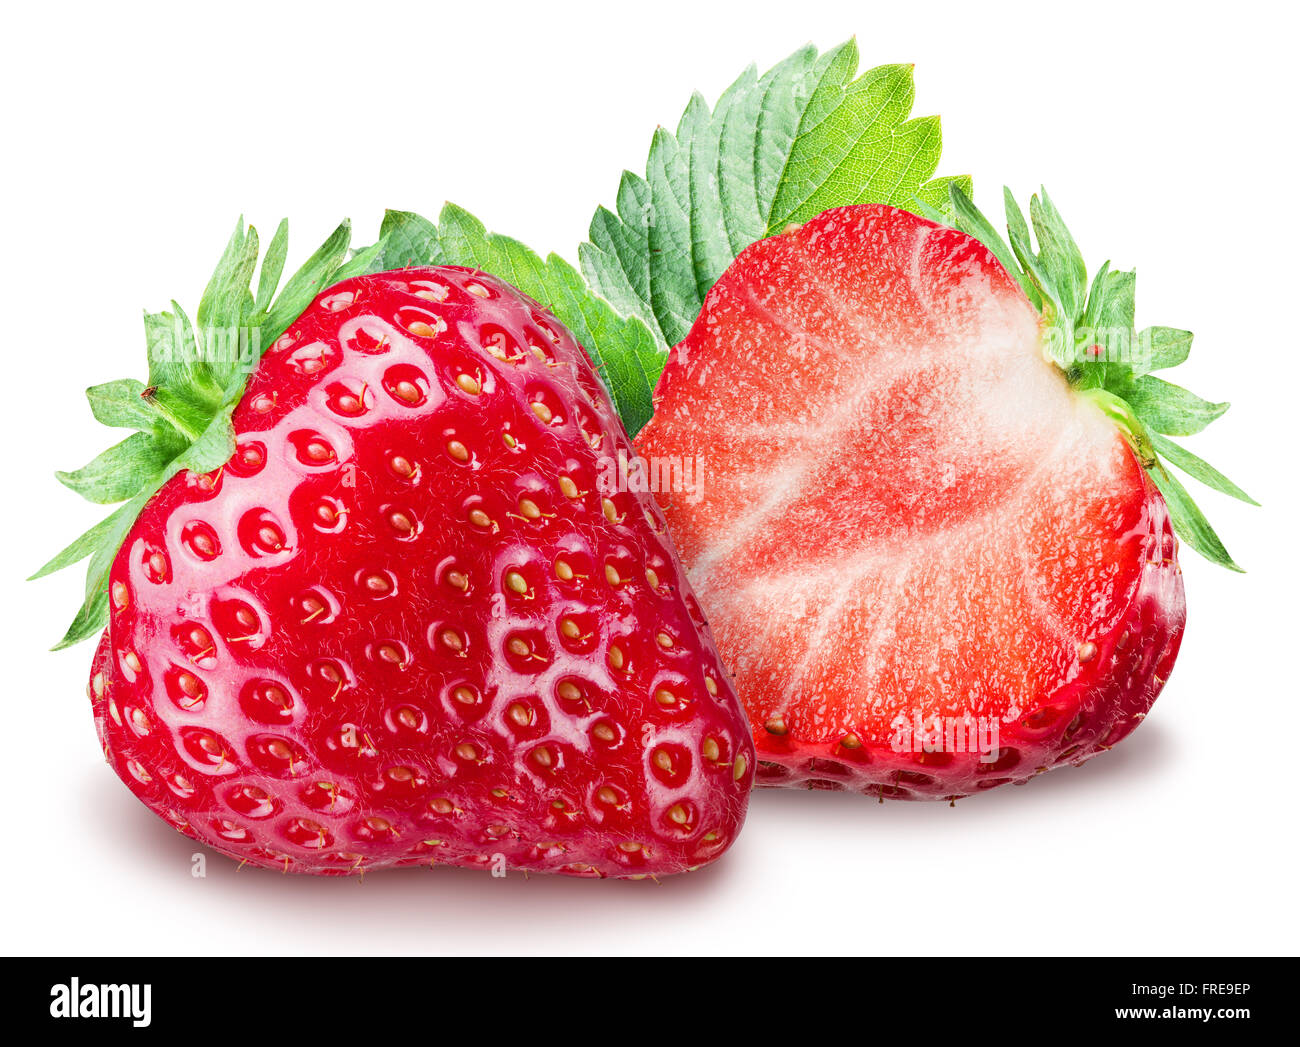 Strawberries on the white background. File contains clipping paths. Stock Photo